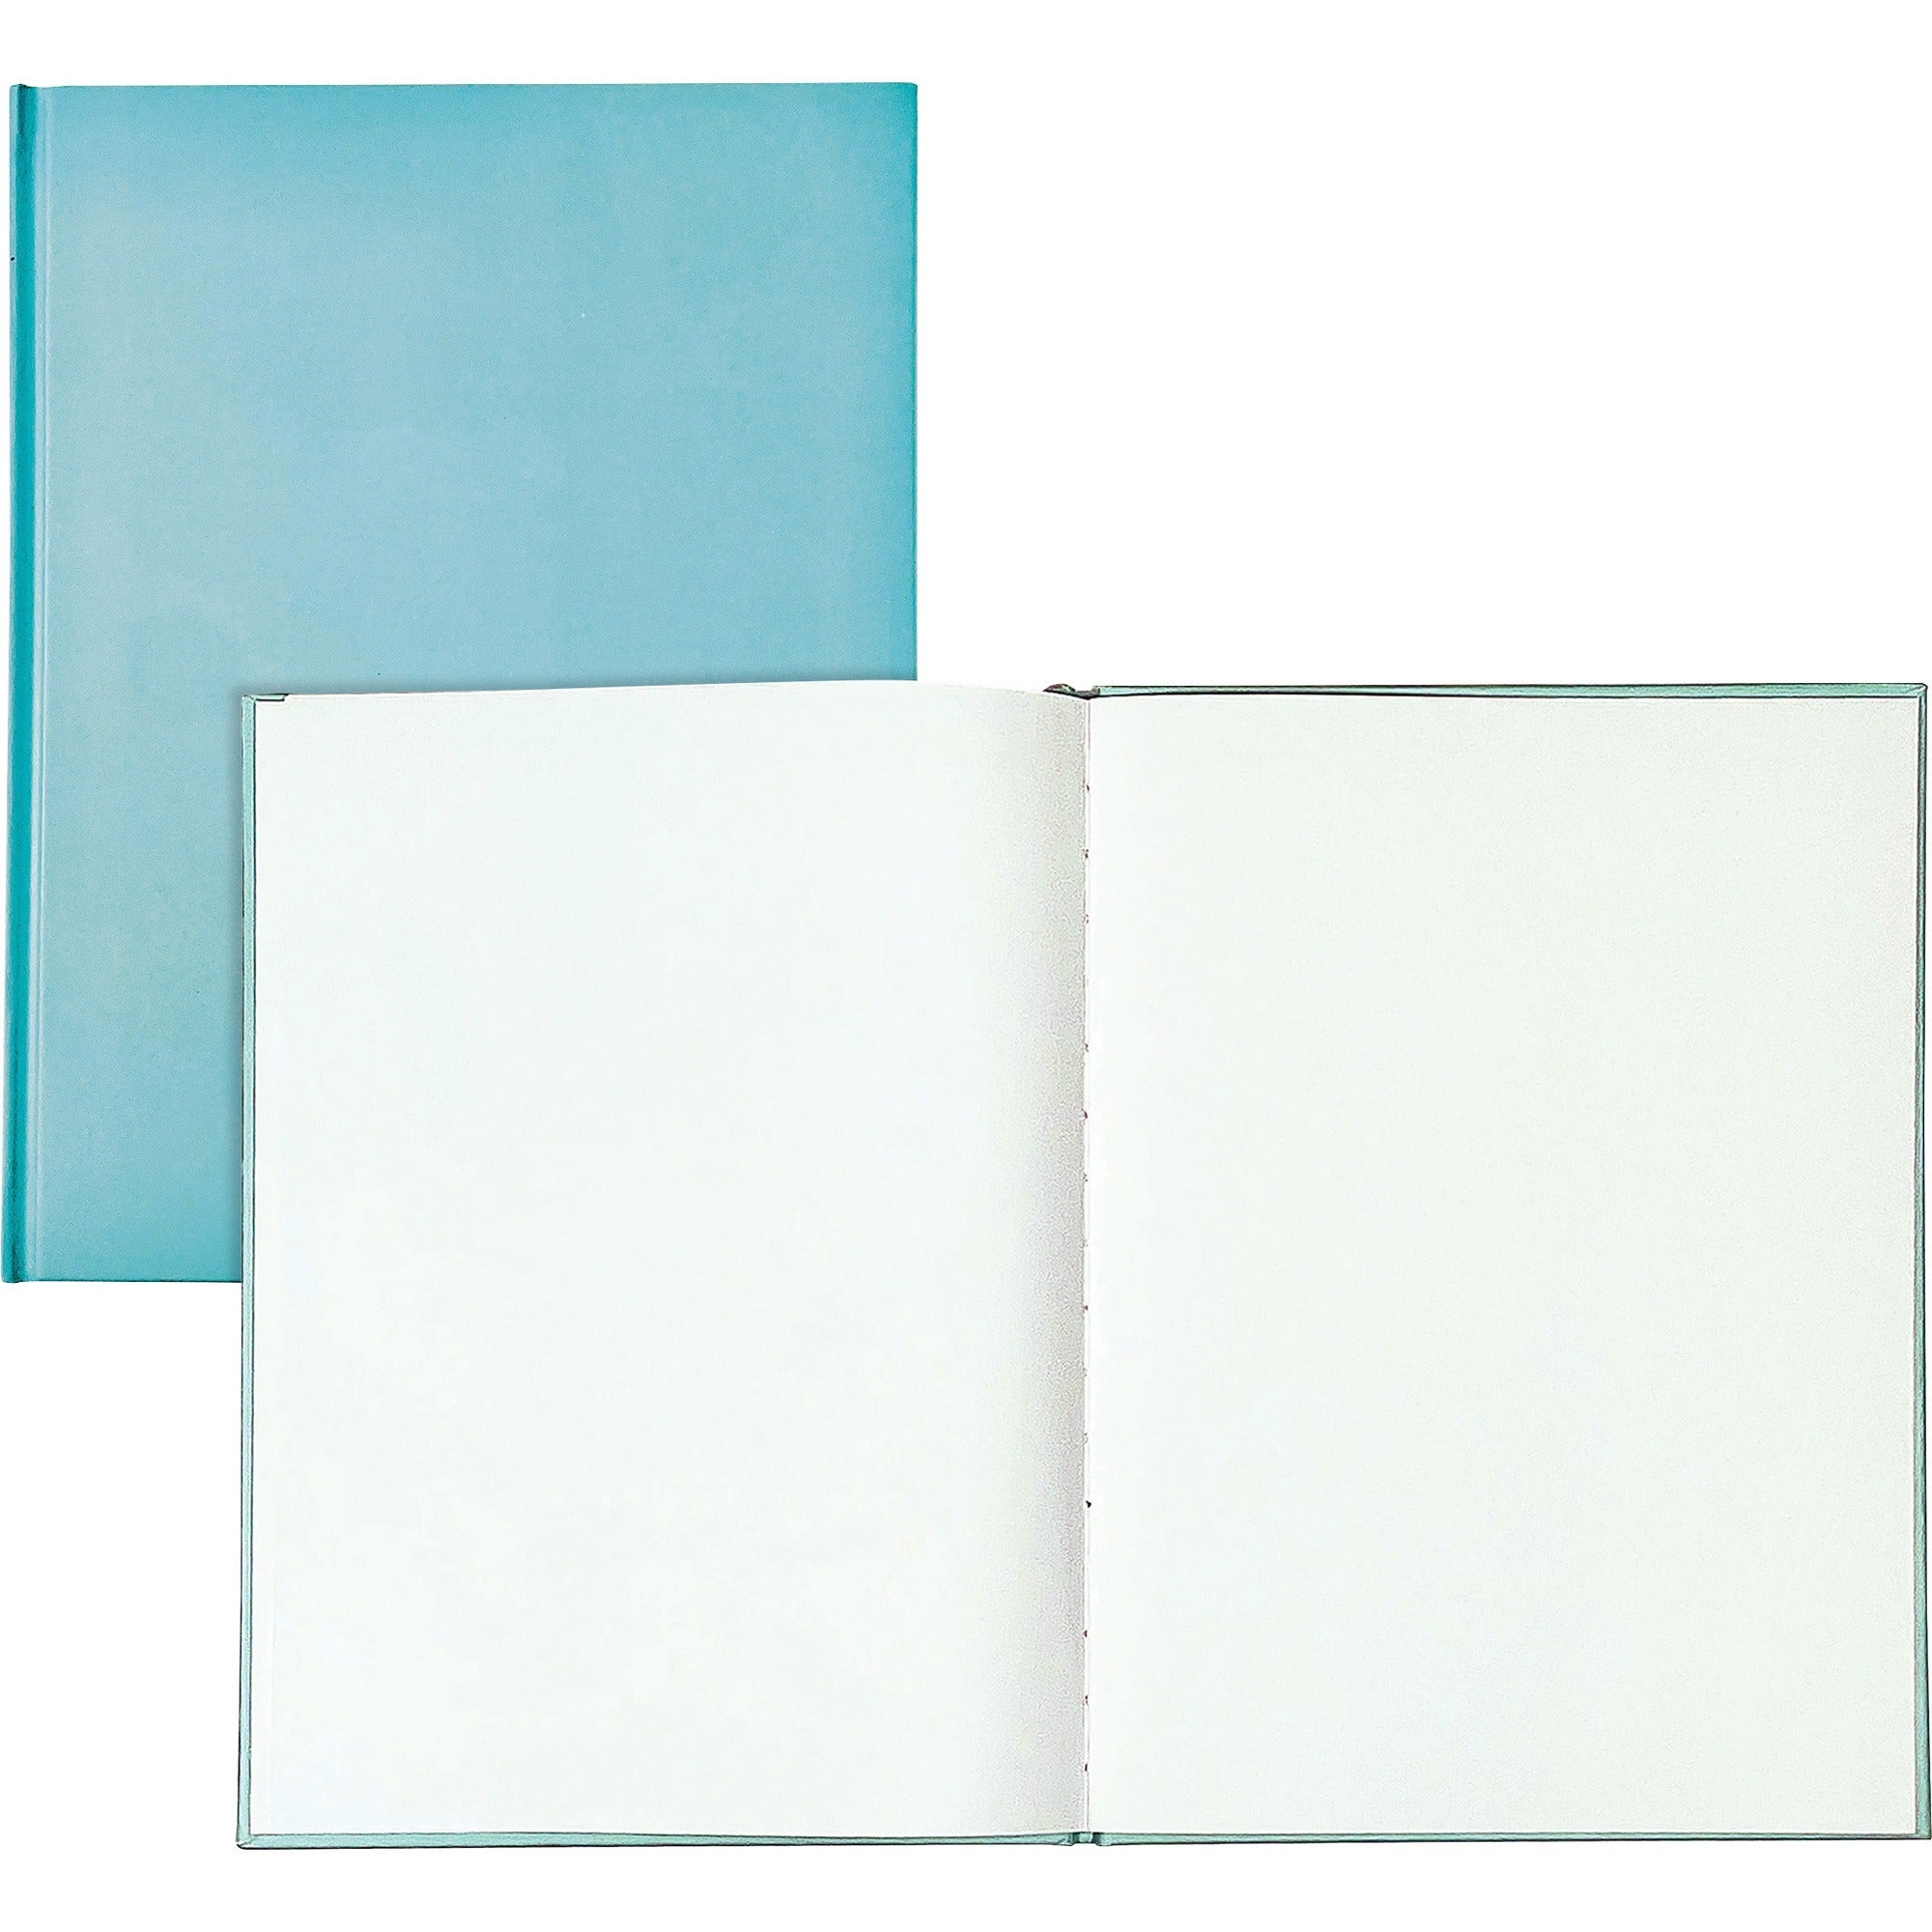 ashley-hardcover-blank-book-28-pages-letter-8-1-2-x-11-blue-cover-hard-cover-durable-1-each_ash10716 - 1